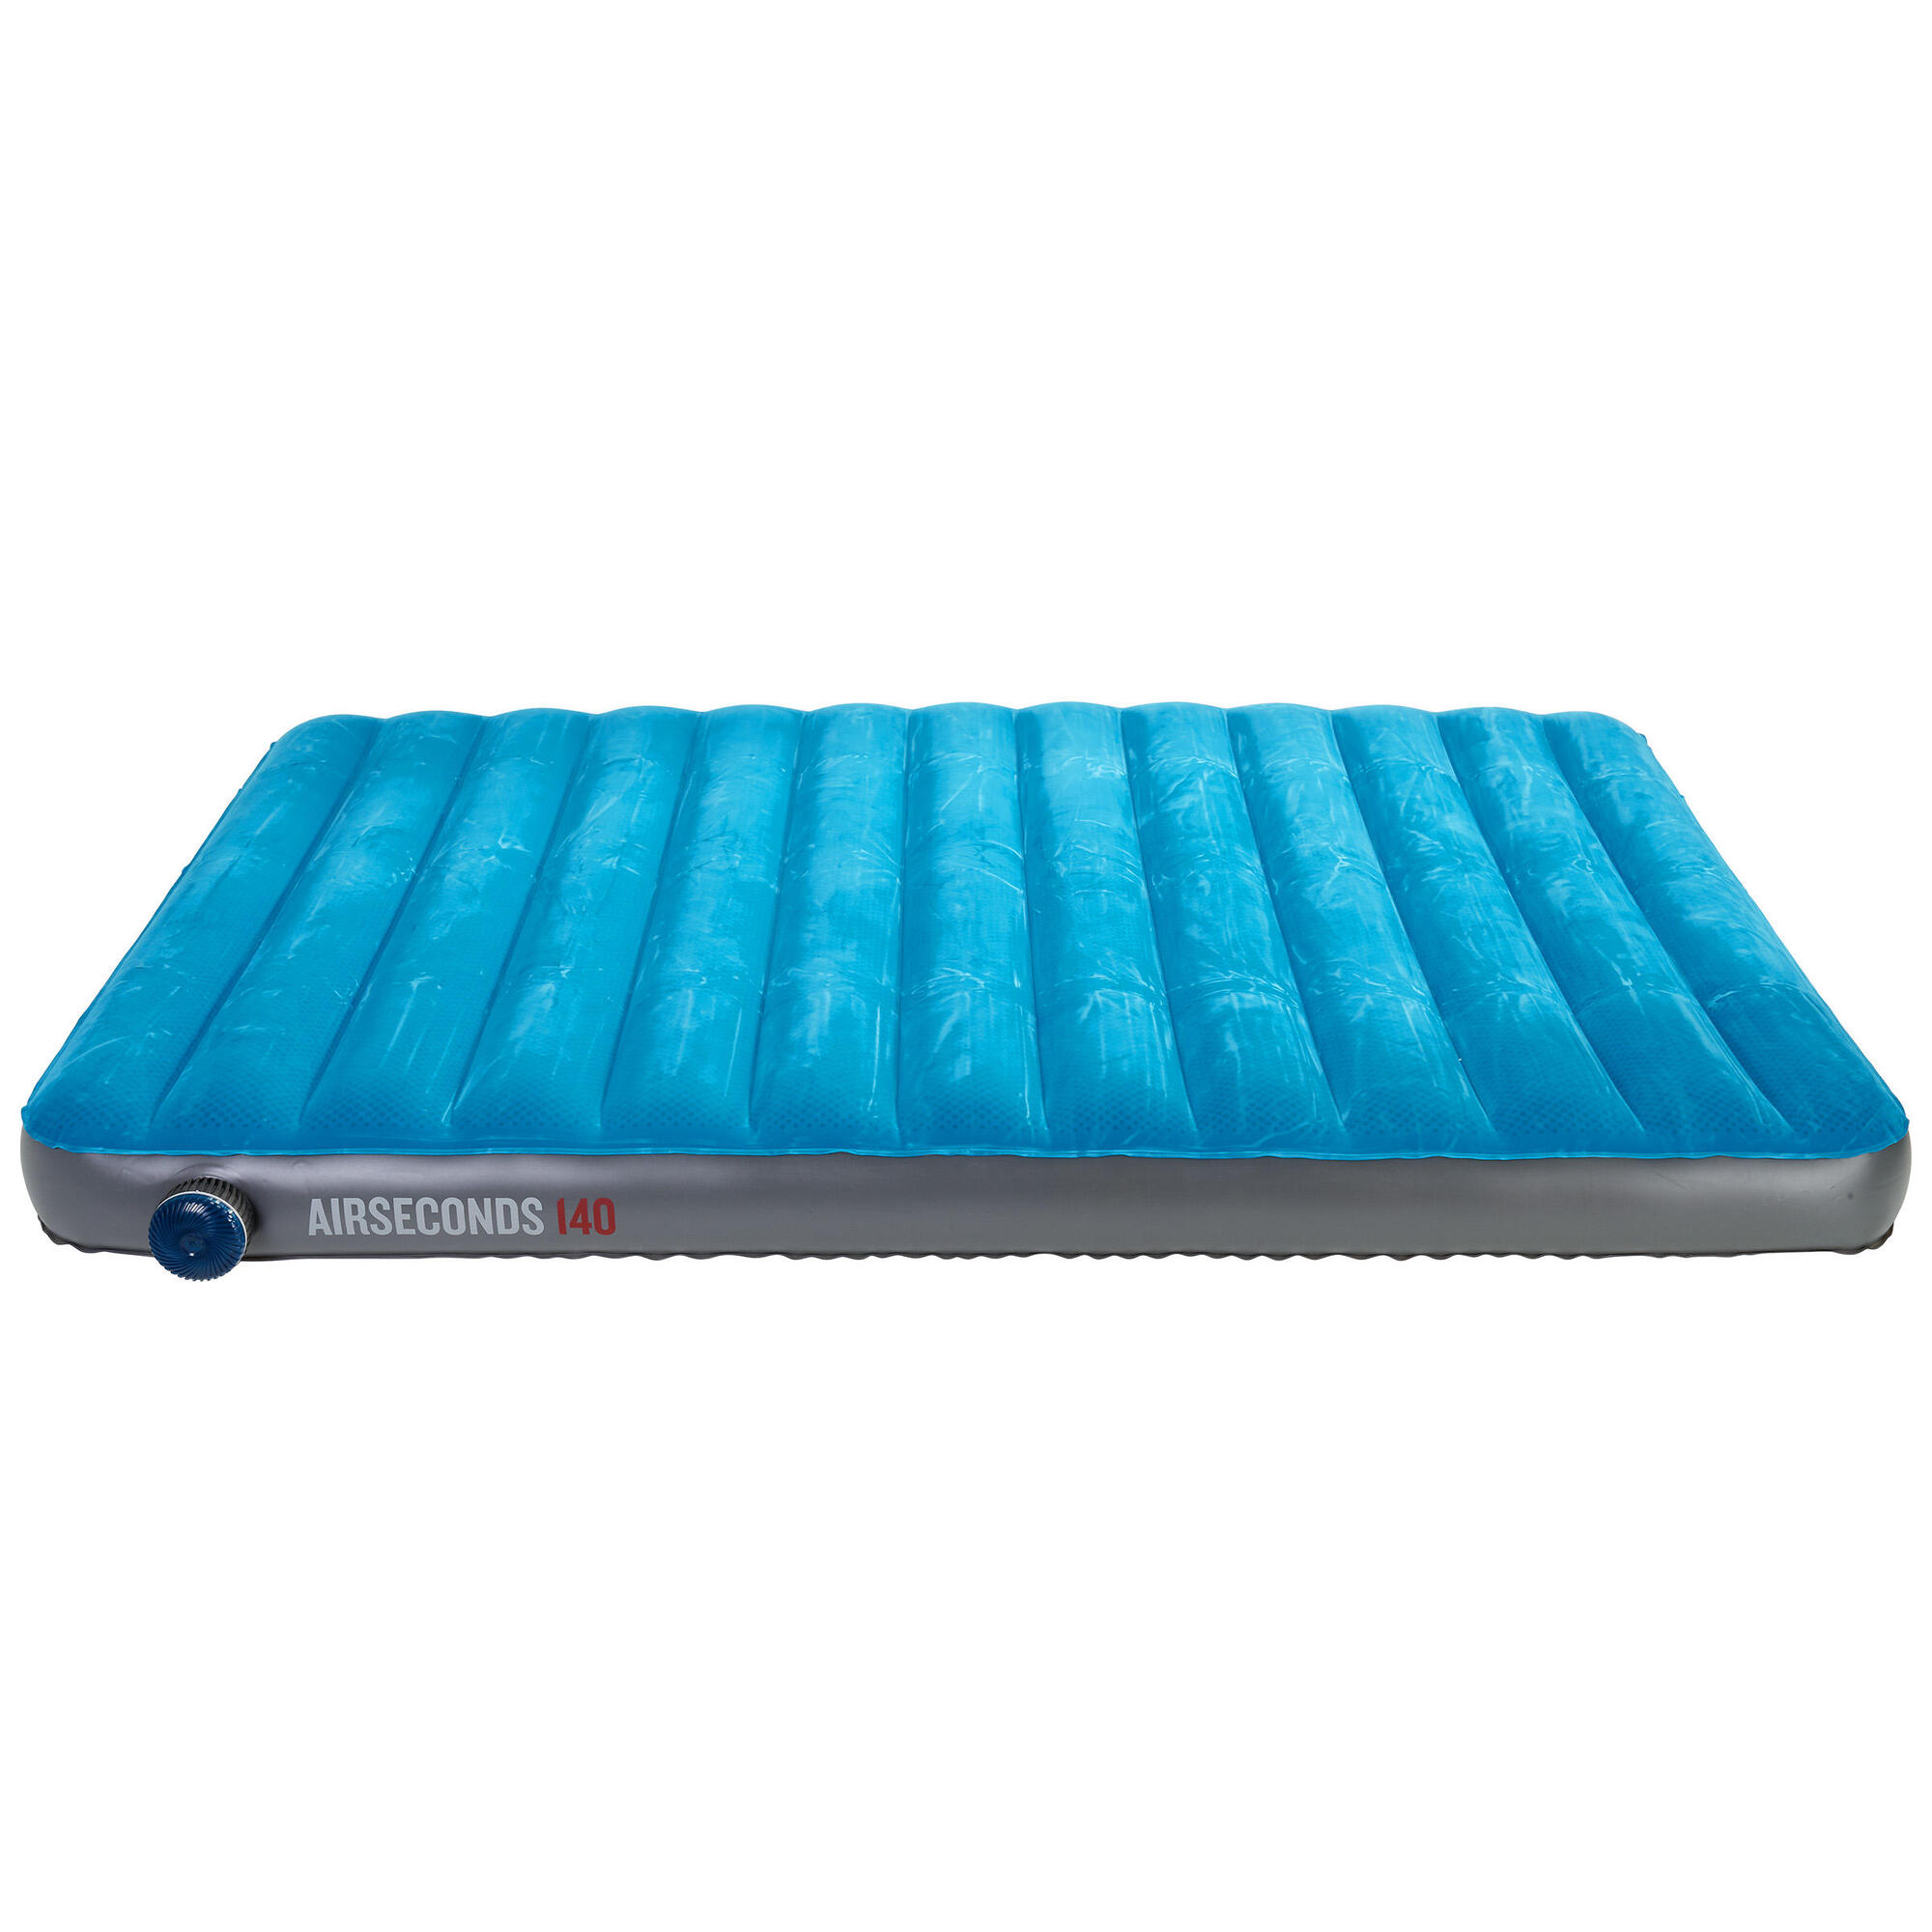 Decathlon Quechua Air seconds, 55" Inflatable Camping Mattress, Quick Inflating, 2 Person, Queen, Blue - image 4 of 13